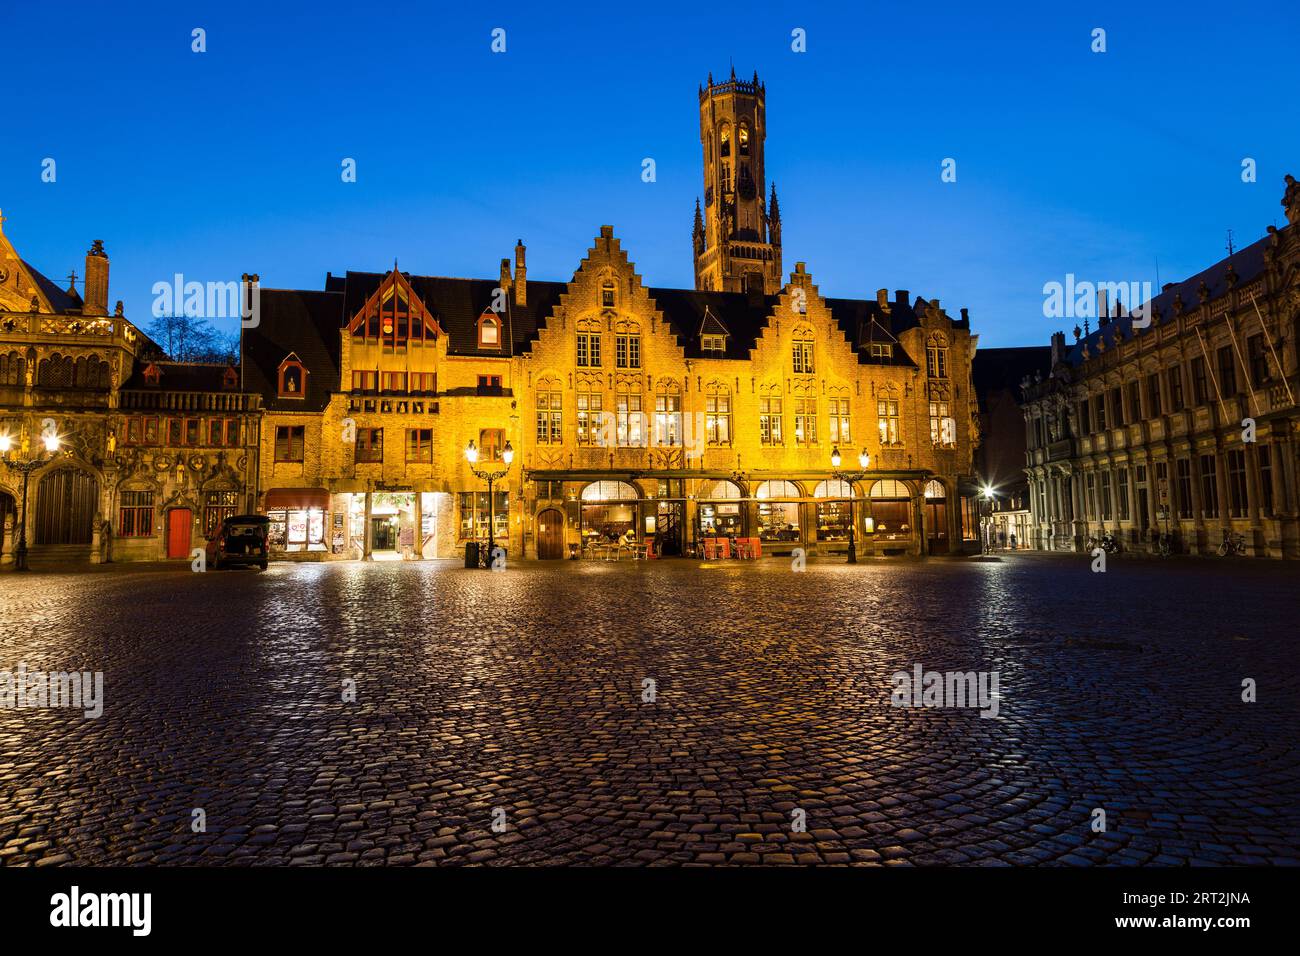 BRUGES, BELGIUM - 19th FEBRUARY 2016: Buildings in Burg Square in Bruges at dusk with a blue sky. The Belfry of Bruges can be seen in the distance. Stock Photo